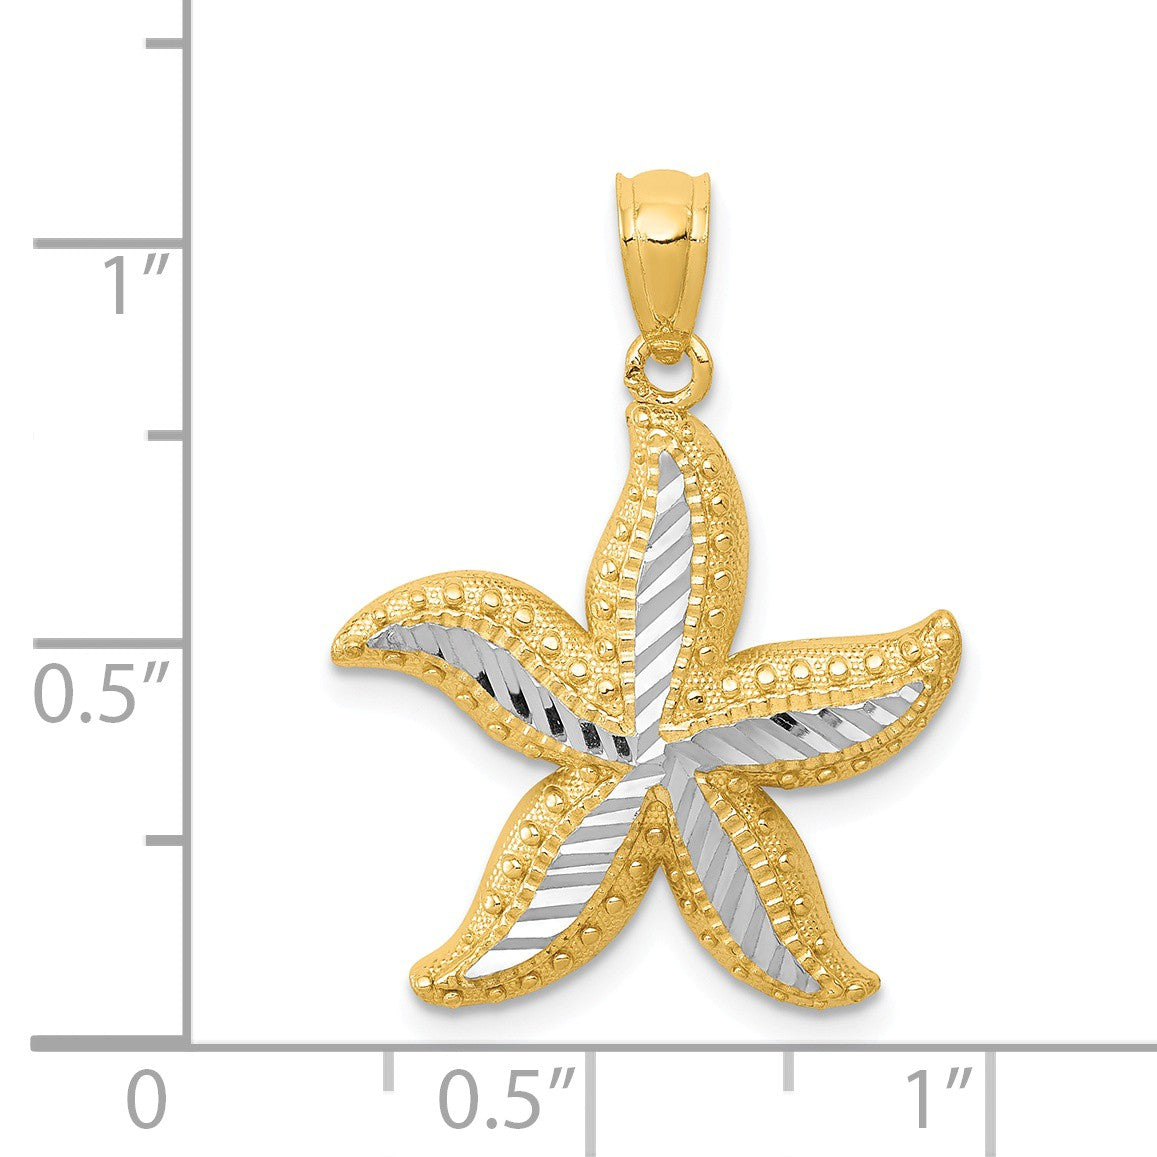 Alternate view of the 14k Yellow Gold and White Rhodium Starfish Pendant, 19mm (3/4 Inch) by The Black Bow Jewelry Co.